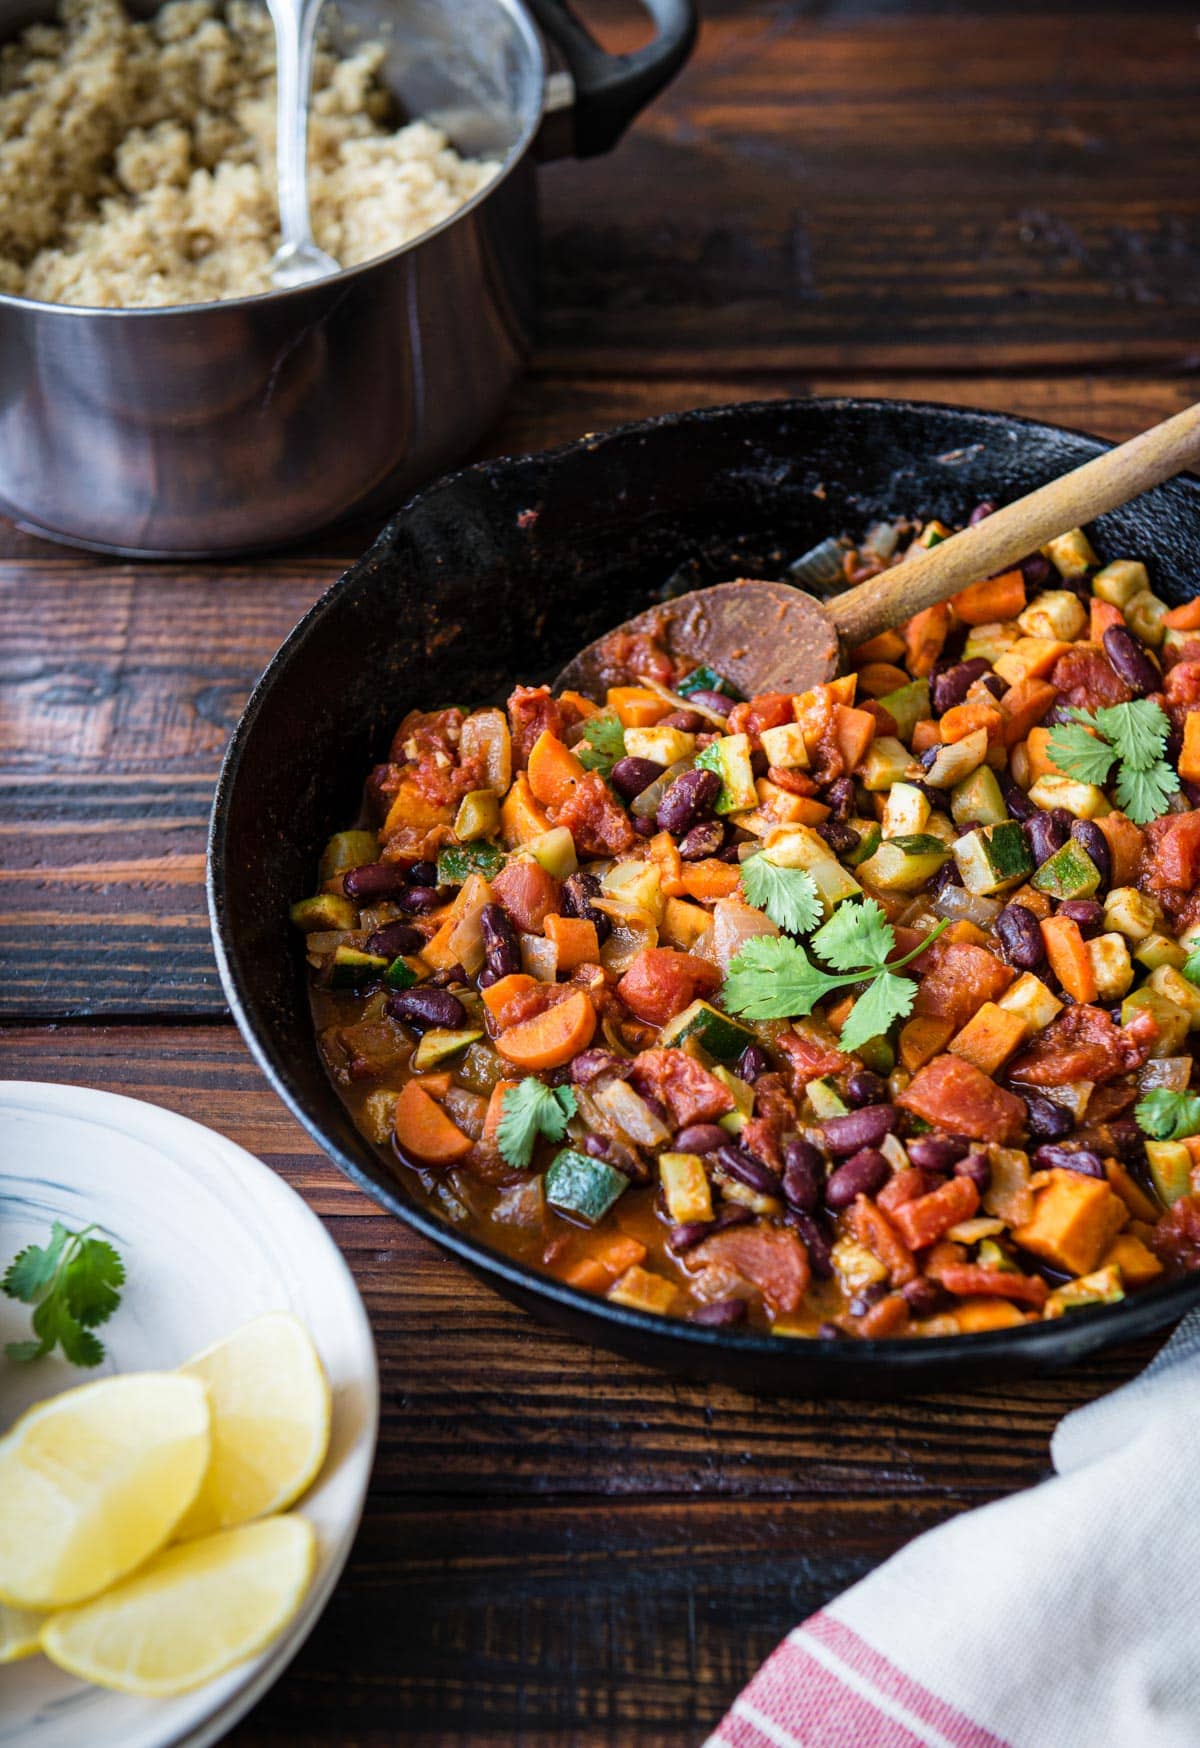 black skillet full of a plant-based chili recipe with a wooden spoon.